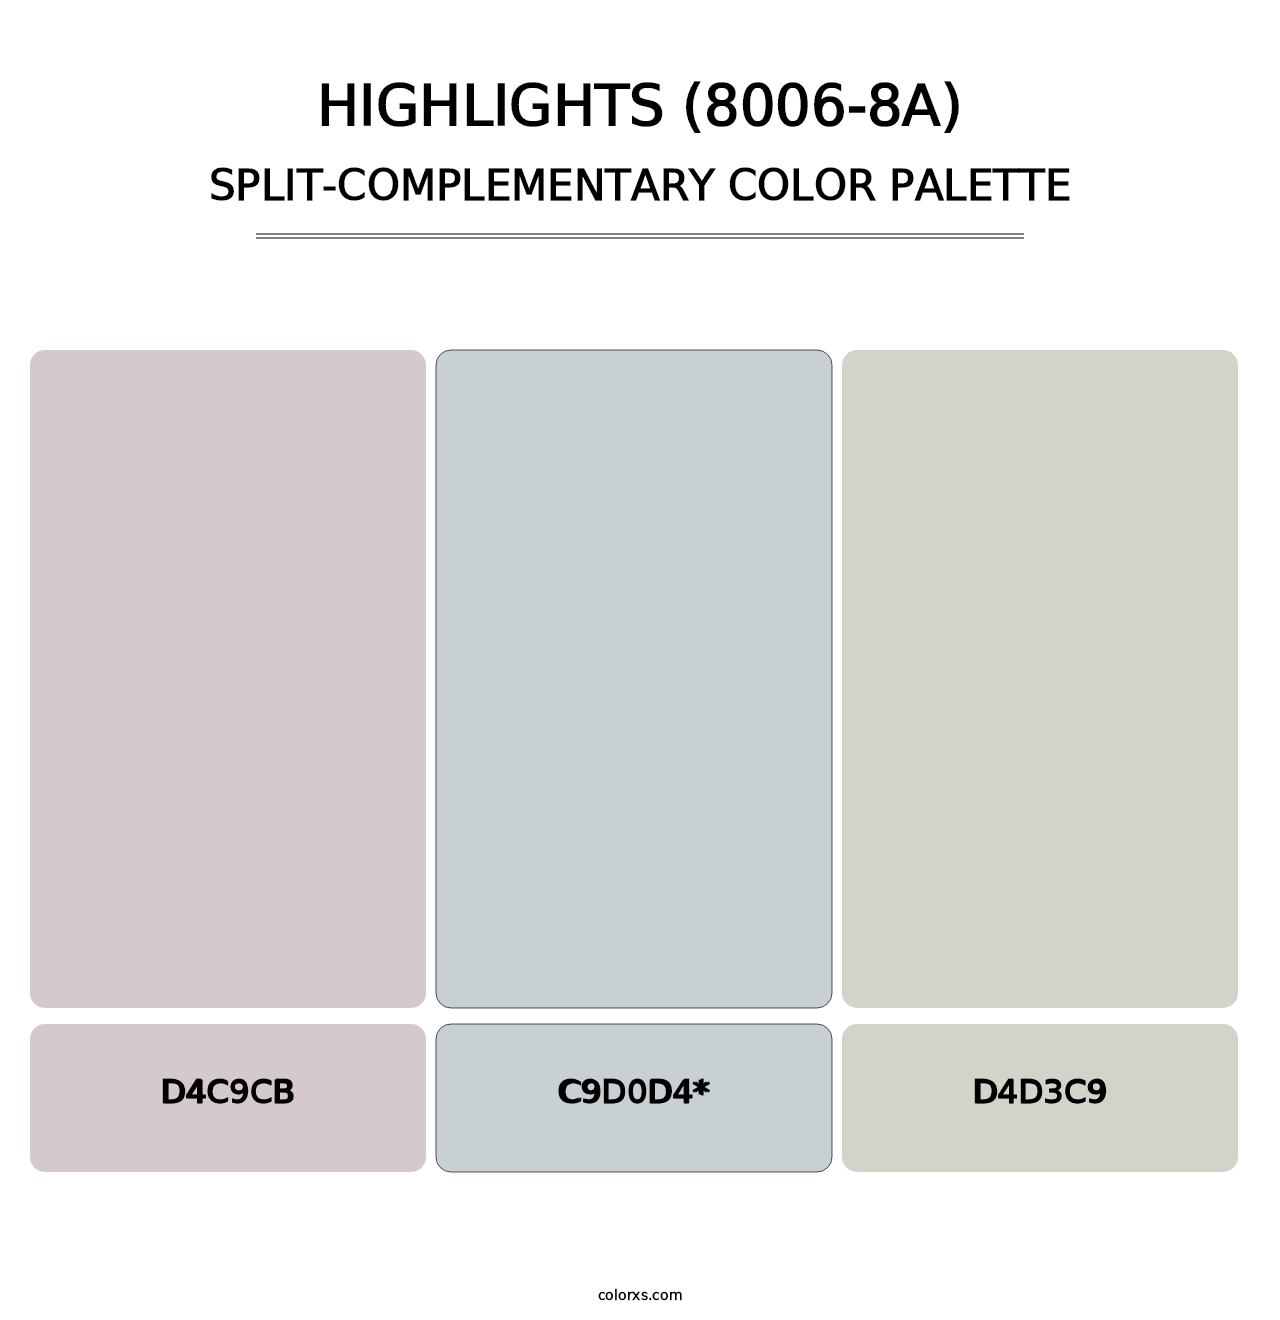 Highlights (8006-8A) - Split-Complementary Color Palette